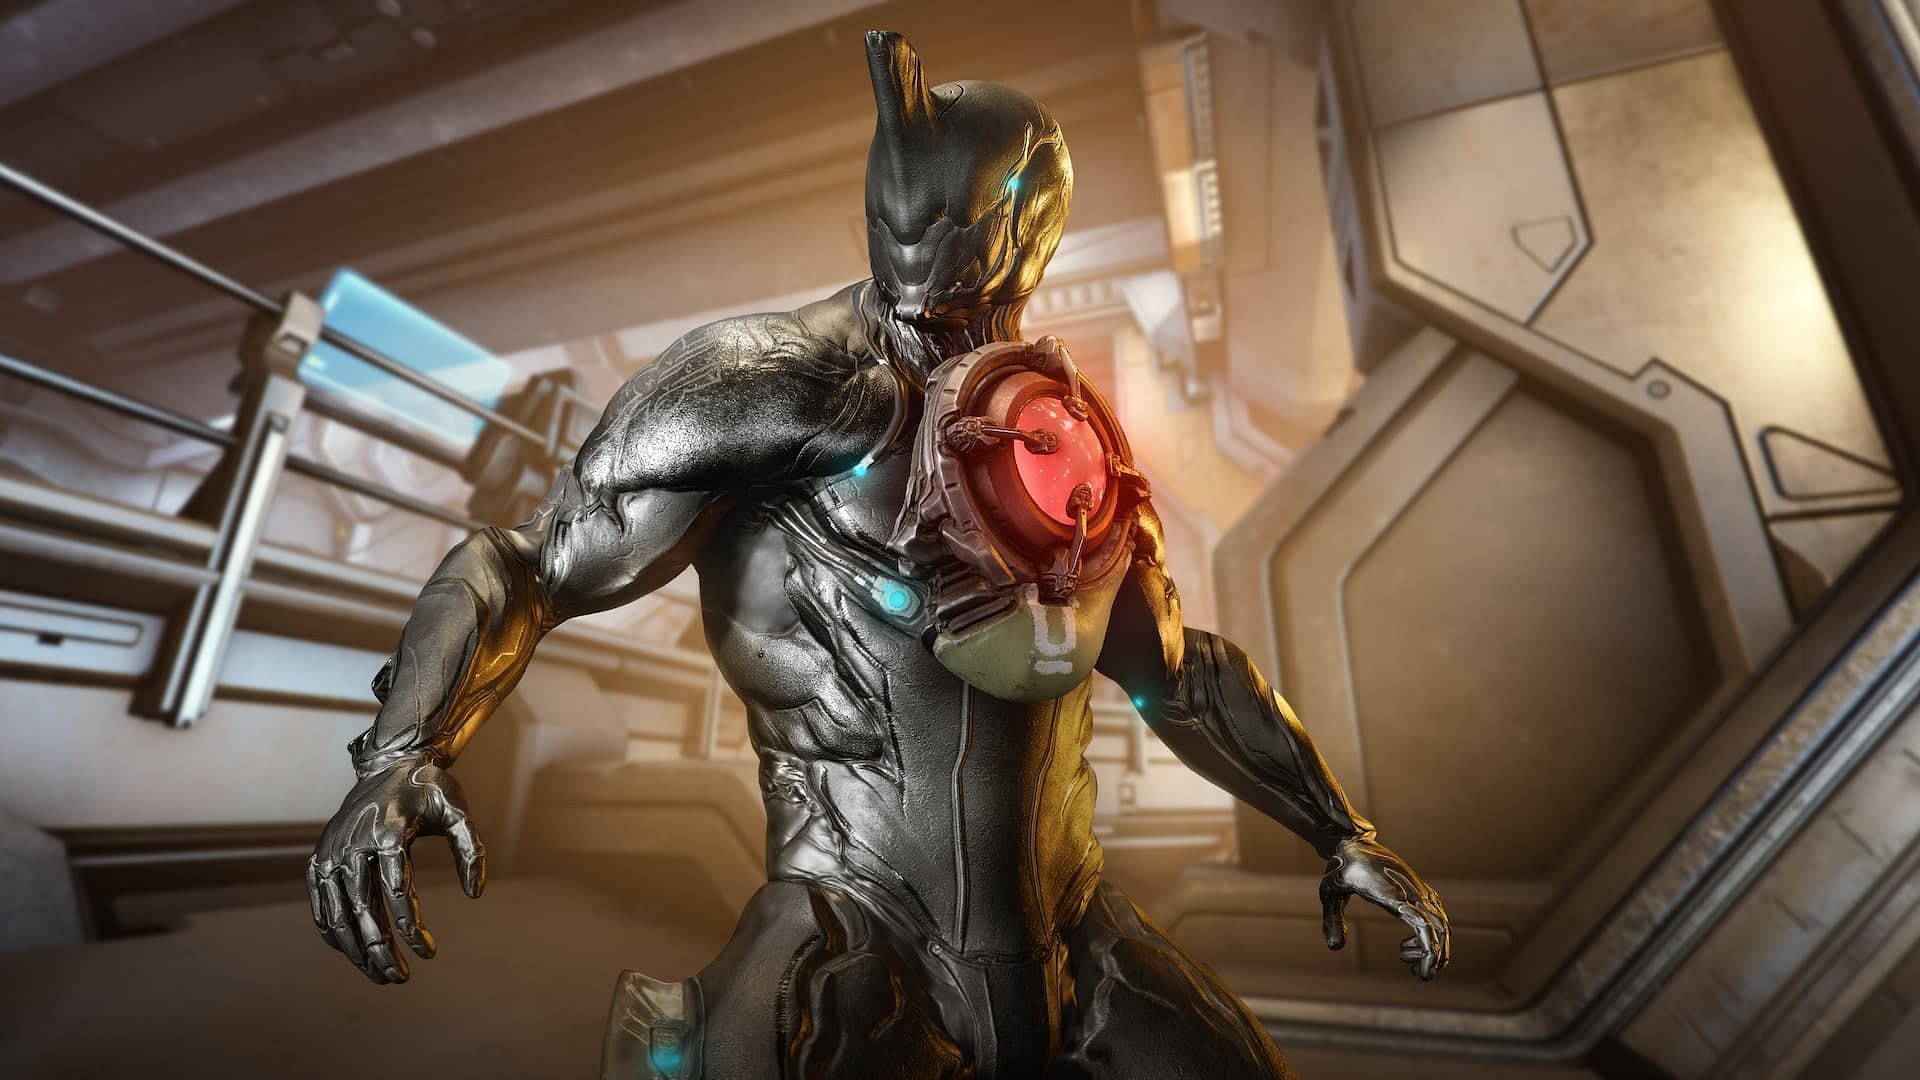 Warframe Update 36.0 patch notes